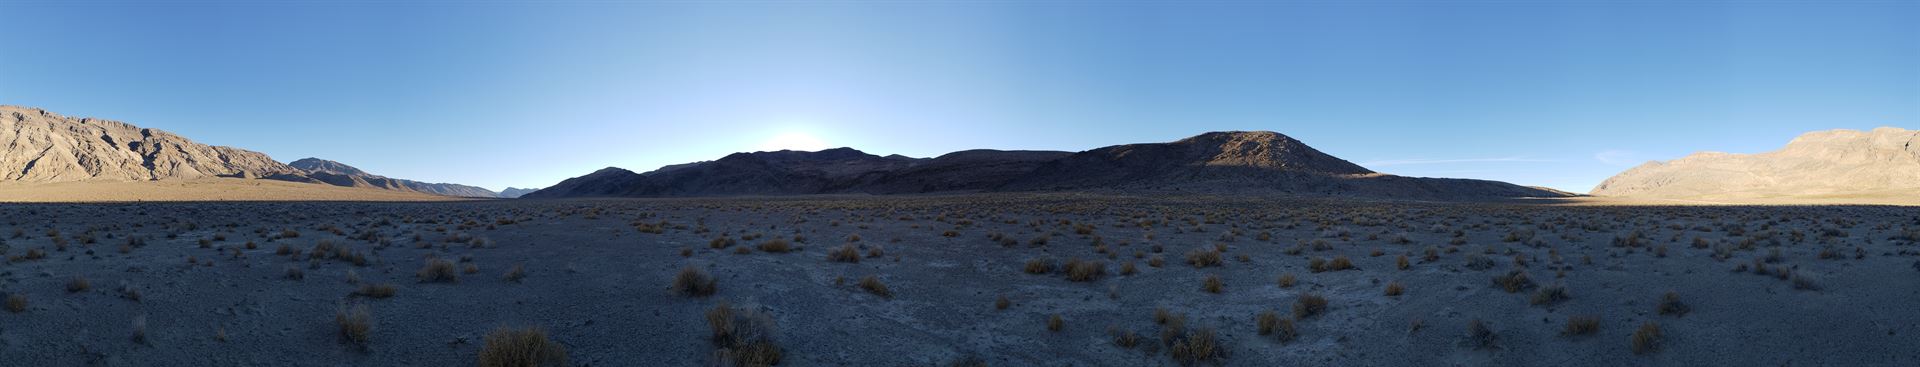 panorama of death valley